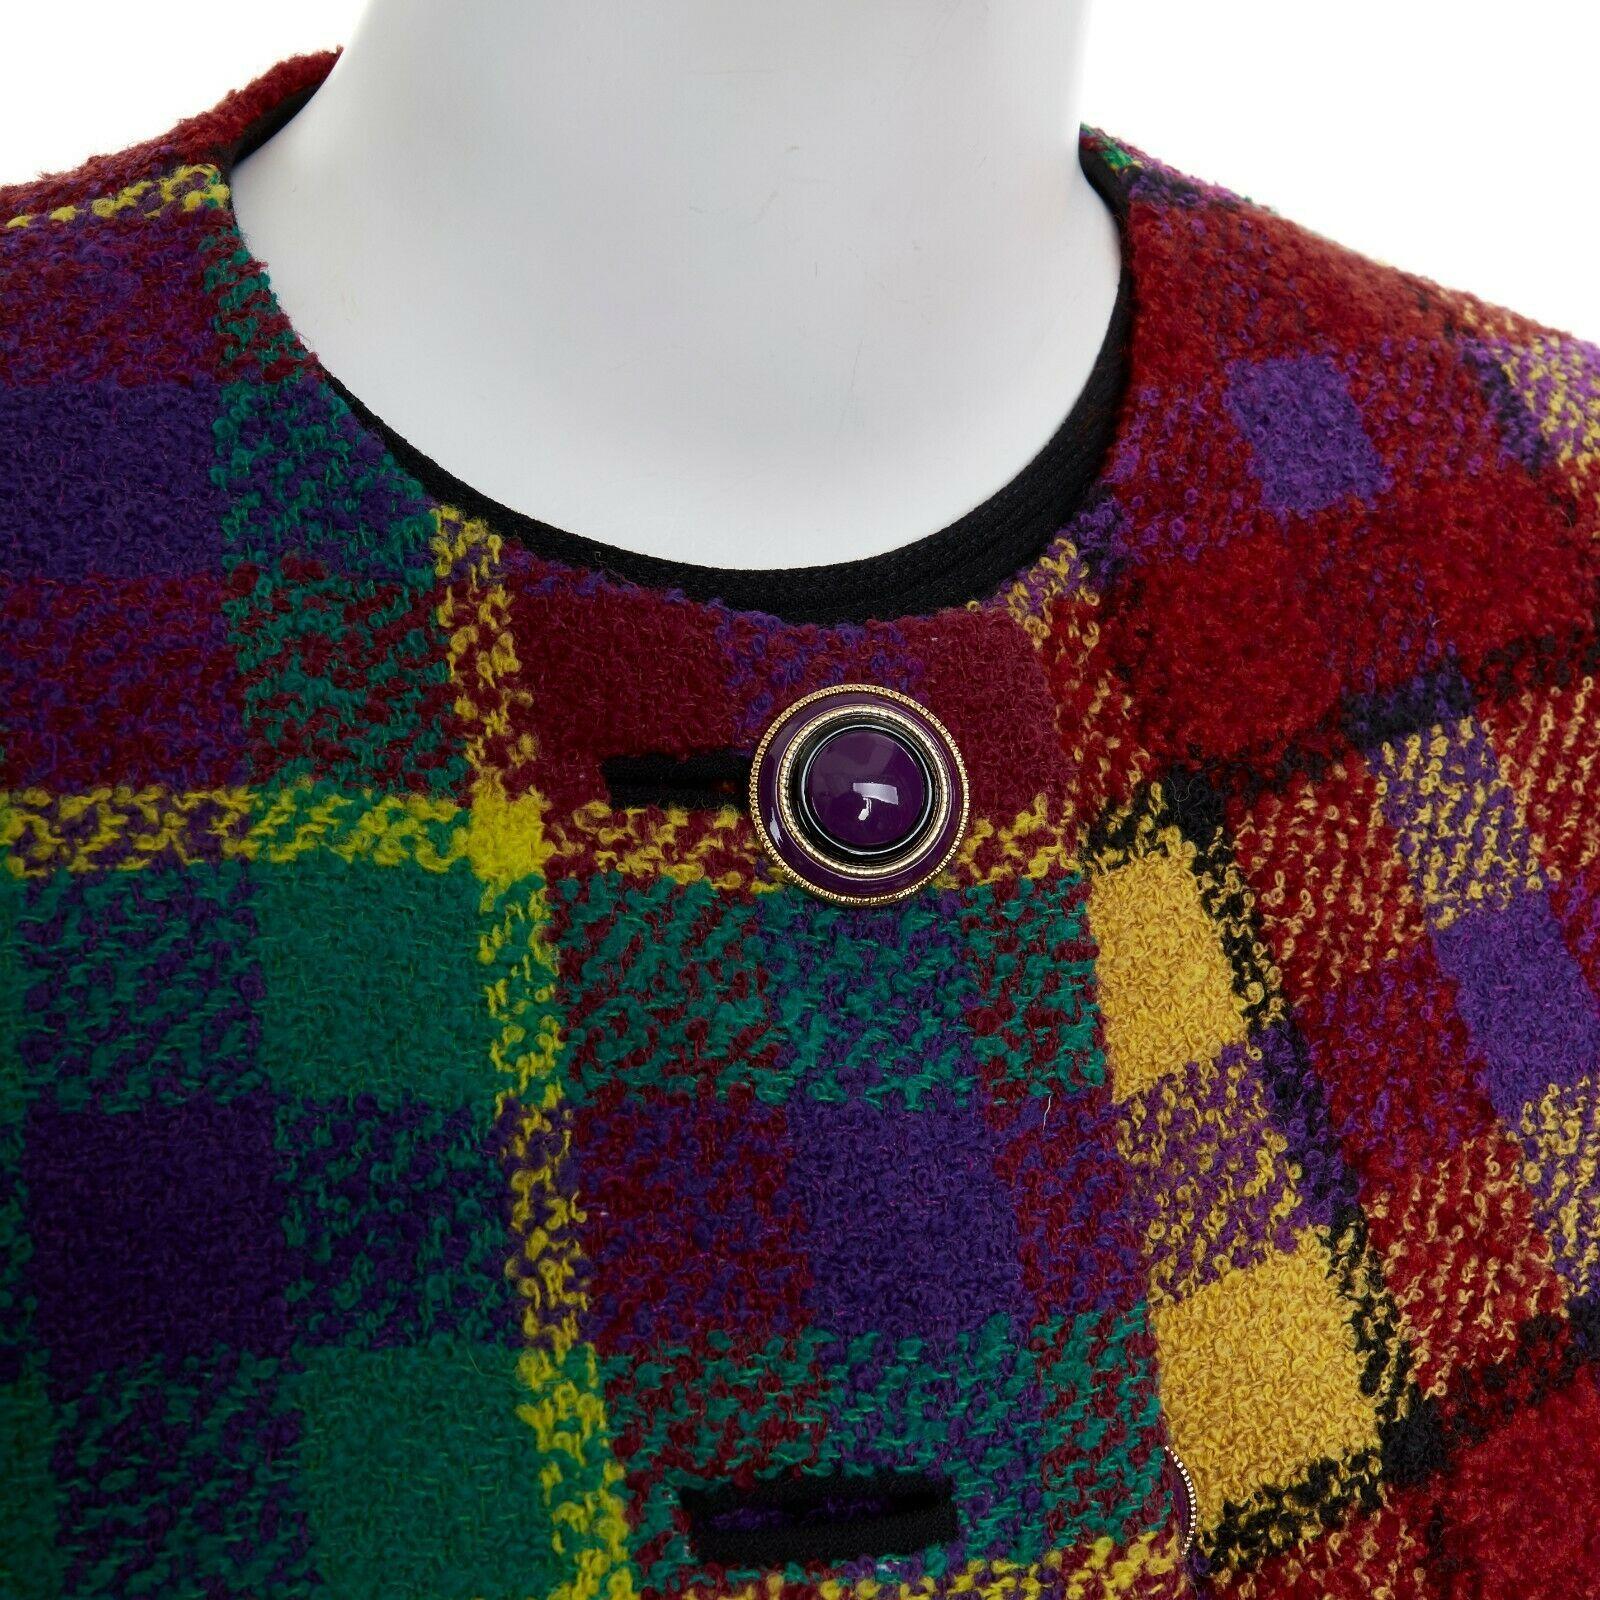 runway GIANNI VERSACE Vintage AW91 multicolor plaid check jacket skirt set S US4

GIANNI VERSACE VINTAGE
FROM THE FALL WINTER 1991 RUNWAY
WOOL, VIRGIN WOOL, NYLON, MOHAIR . MULTICOLORED CHECKS . 
GOLD PURPLE BUTTON ON COAT . DUAL SLIT POCKET AT